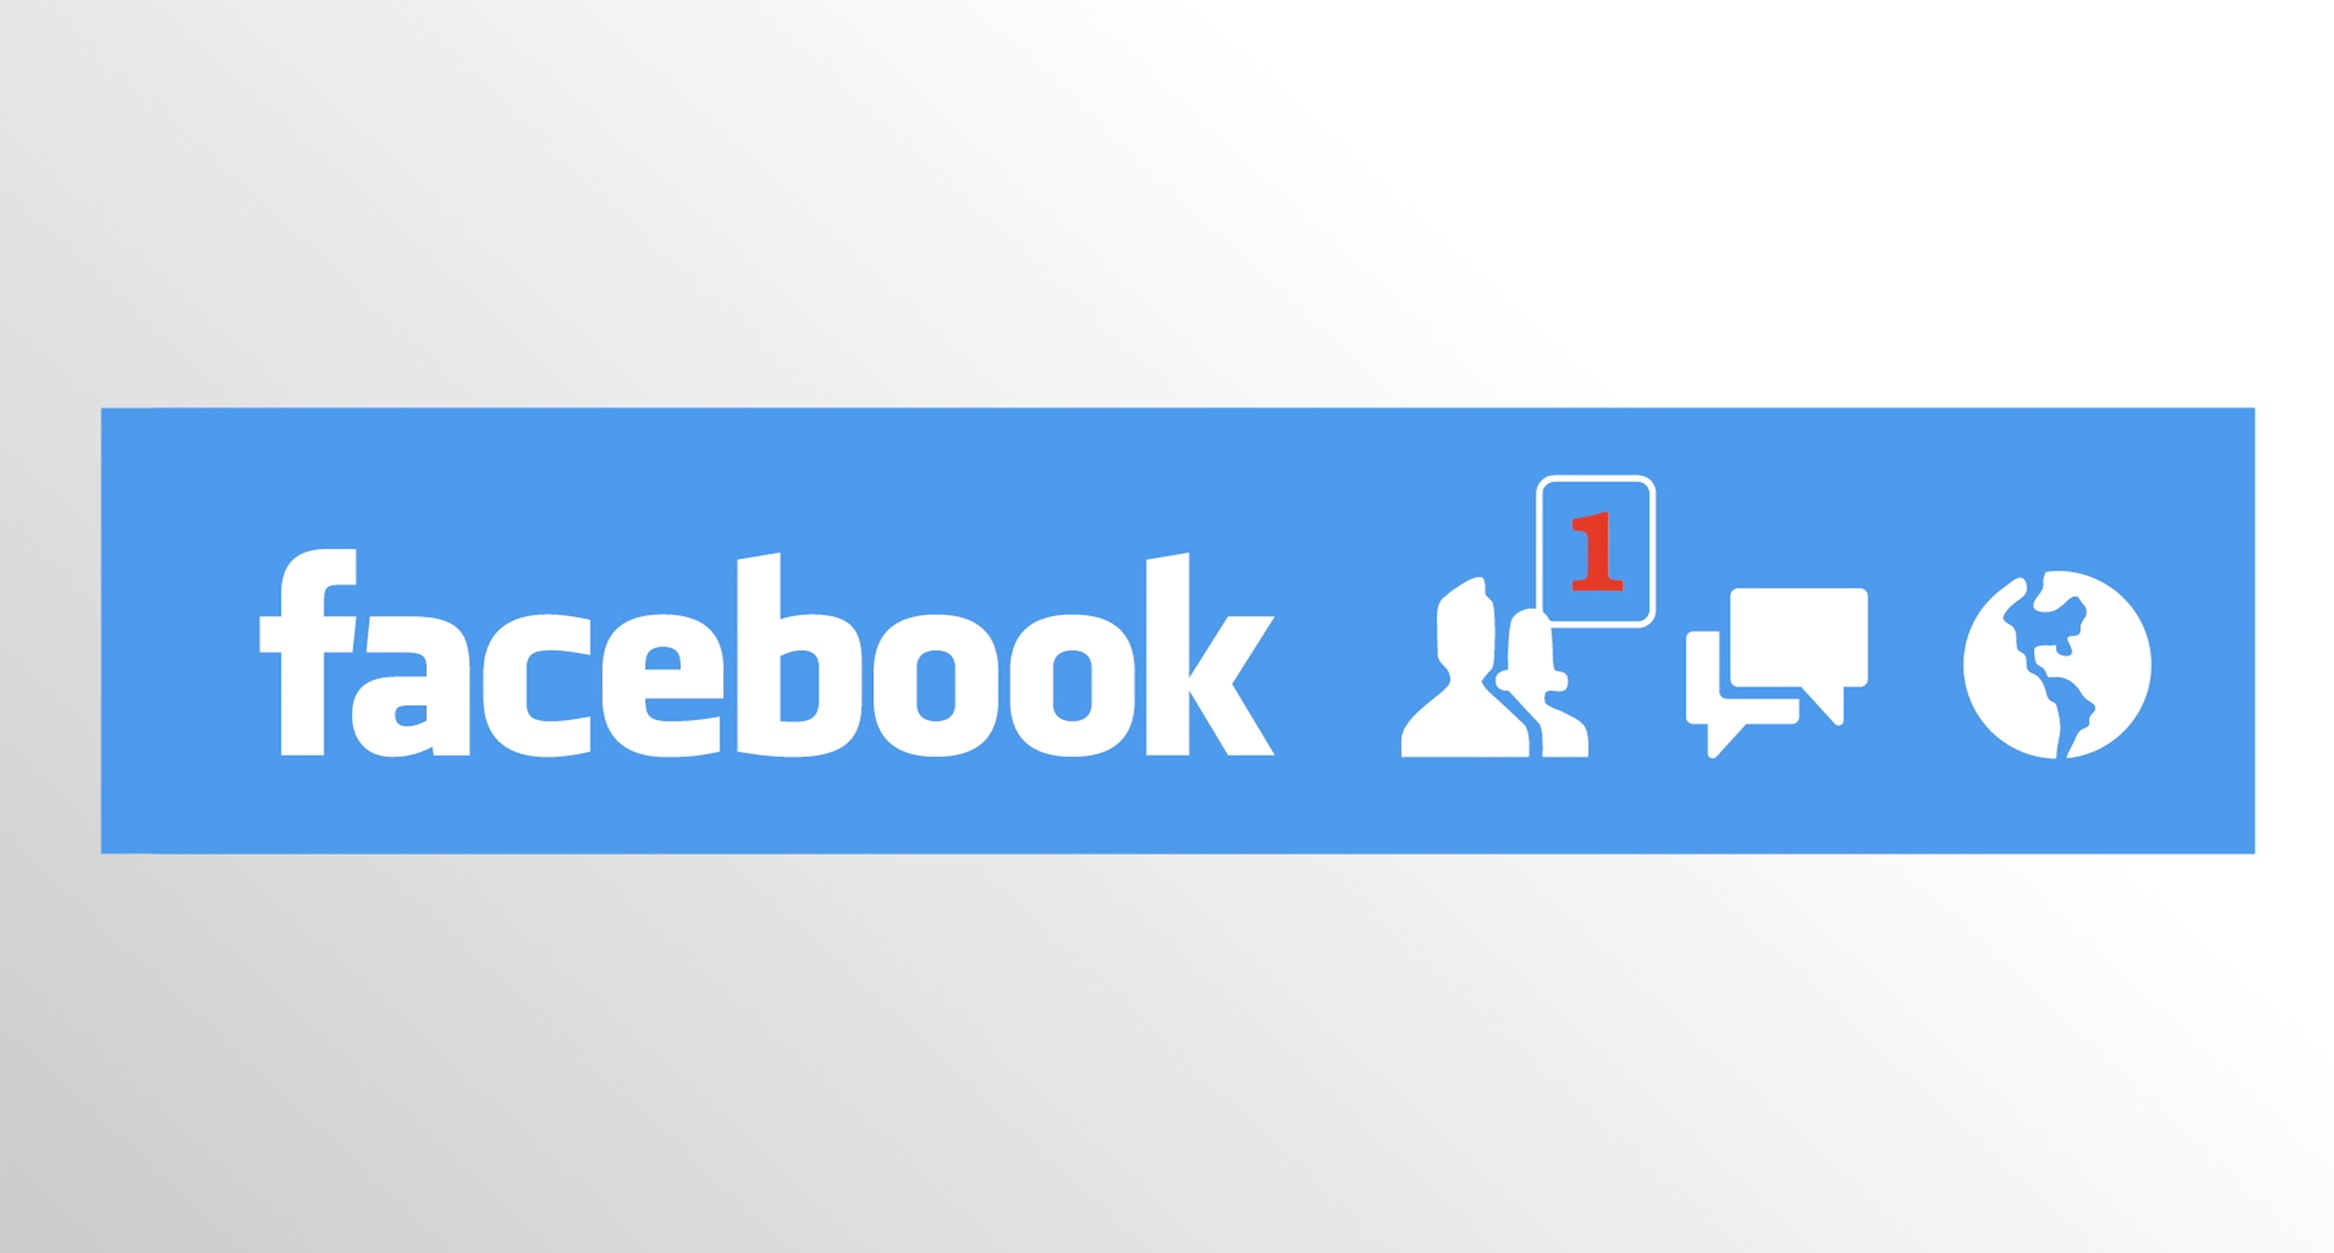 A Facebook logo and the info bar from the website.